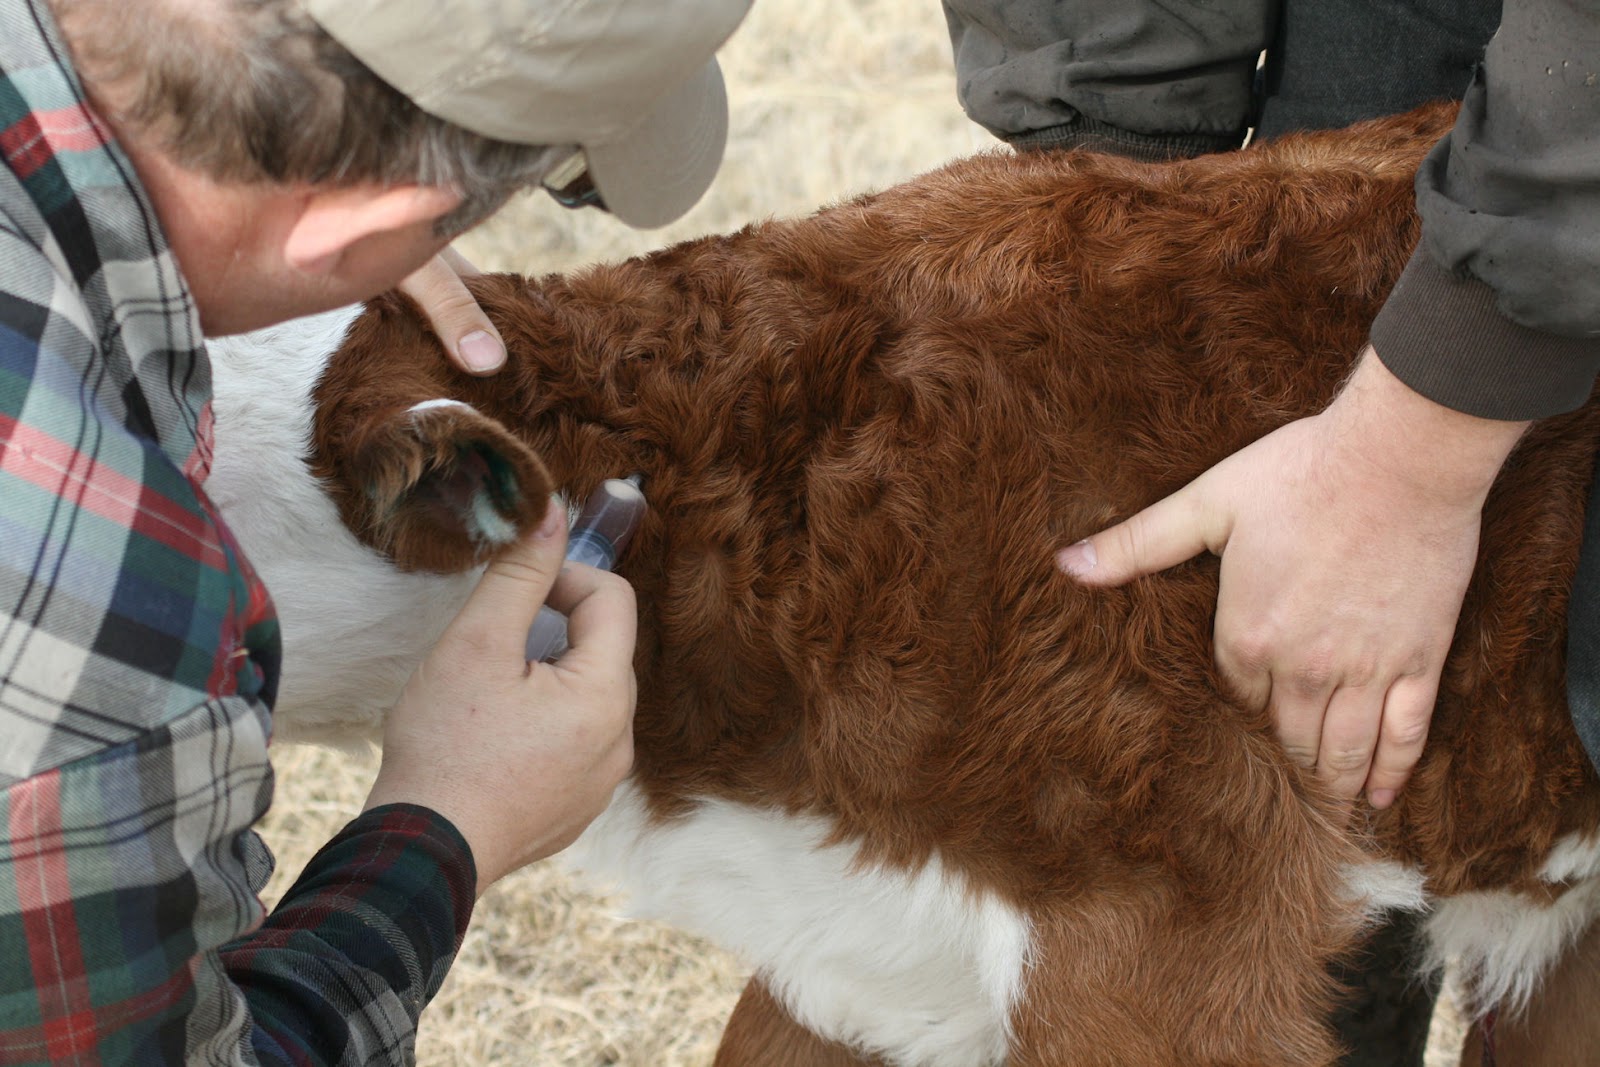 OSU's Mark Johnson and Rosslyn Biggs Talk On the Purpose of a Vaccination Plan for Cattle